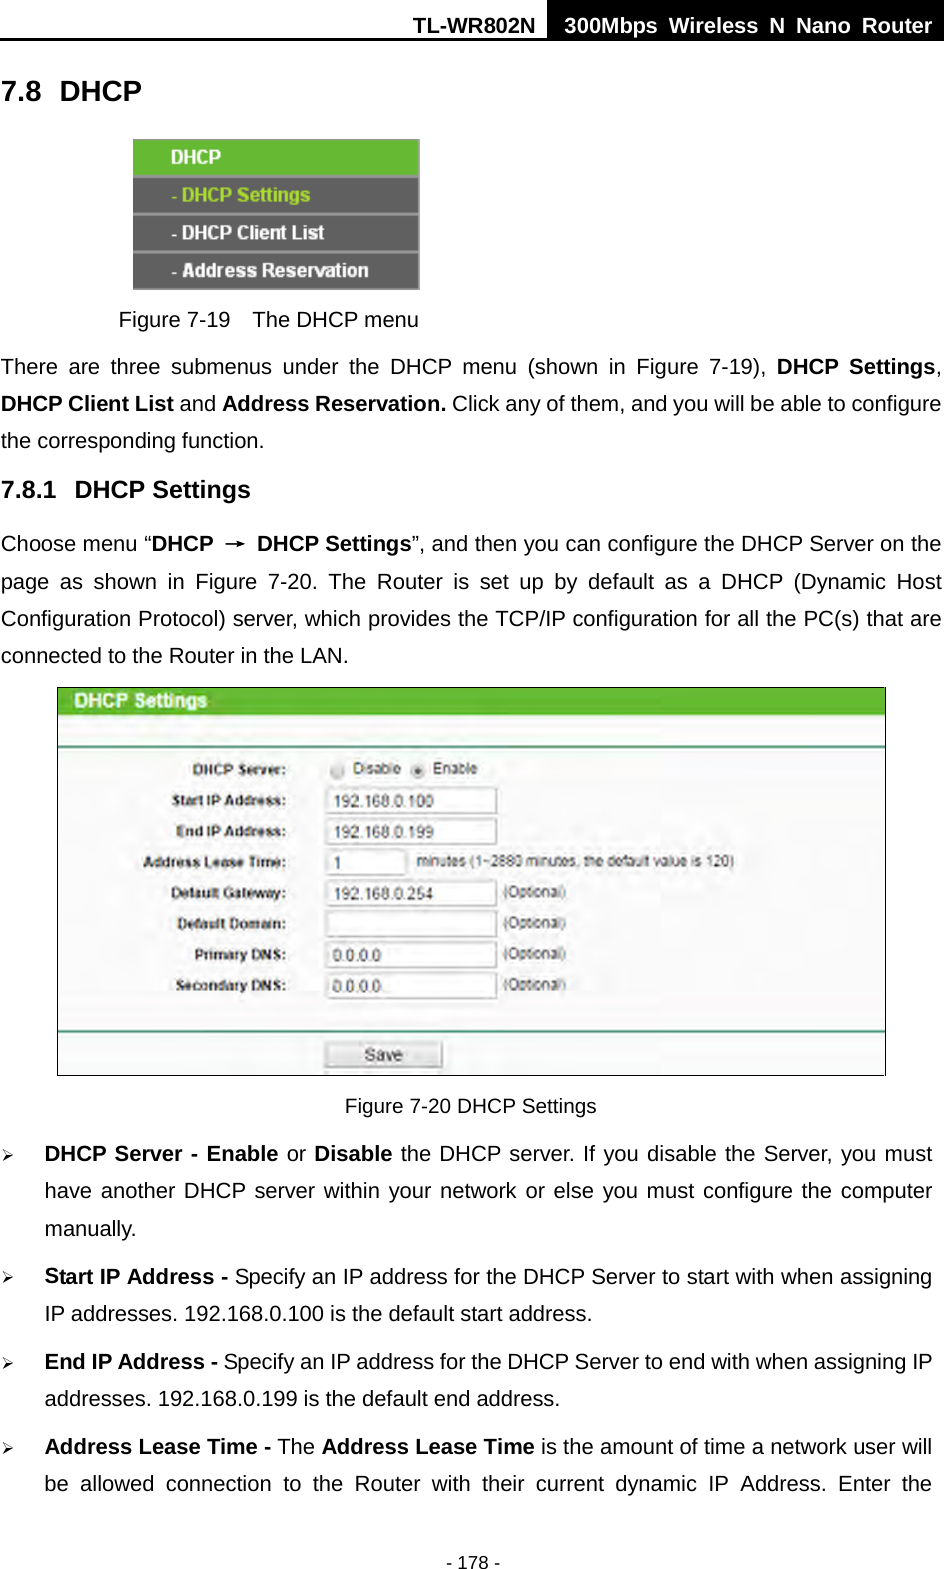 TL-WR802N  300Mbps Wireless N Nano Router  7.8 DHCP  Figure 7-19  The DHCP menu There are three submenus under the DHCP menu (shown in Figure  7-19),  DHCP Settings, DHCP Client List and Address Reservation. Click any of them, and you will be able to configure the corresponding function. 7.8.1 DHCP Settings Choose menu “DHCP  → DHCP Settings”, and then you can configure the DHCP Server on the page  as  shown in Figure  7-20.  The  Router is set up by default as a DHCP (Dynamic Host Configuration Protocol) server, which provides the TCP/IP configuration for all the PC(s) that are connected to the Router in the LAN.    Figure 7-20 DHCP Settings  DHCP Server - Enable or Disable the DHCP server. If you disable the Server, you must have another DHCP server within your network or else you must configure the computer manually.  Start IP Address - Specify an IP address for the DHCP Server to start with when assigning IP addresses. 192.168.0.100 is the default start address.  End IP Address - Specify an IP address for the DHCP Server to end with when assigning IP addresses. 192.168.0.199 is the default end address.  Address Lease Time - The Address Lease Time is the amount of time a network user will be allowed connection to the Router with their current dynamic IP Address. Enter the - 178 - 